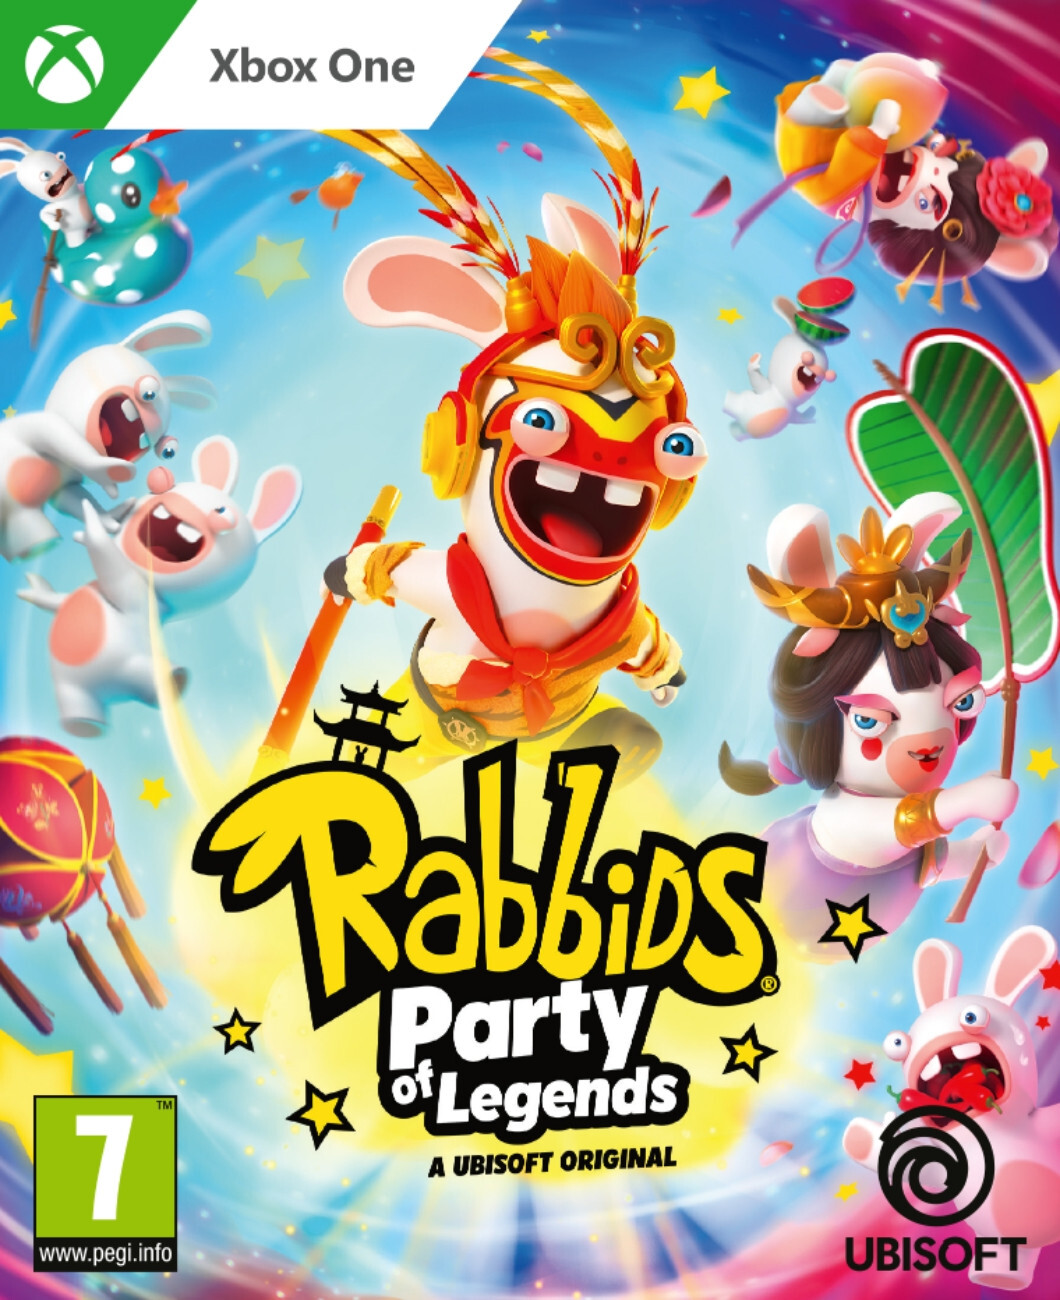 Ubisoft rabbids party of legends Xbox One